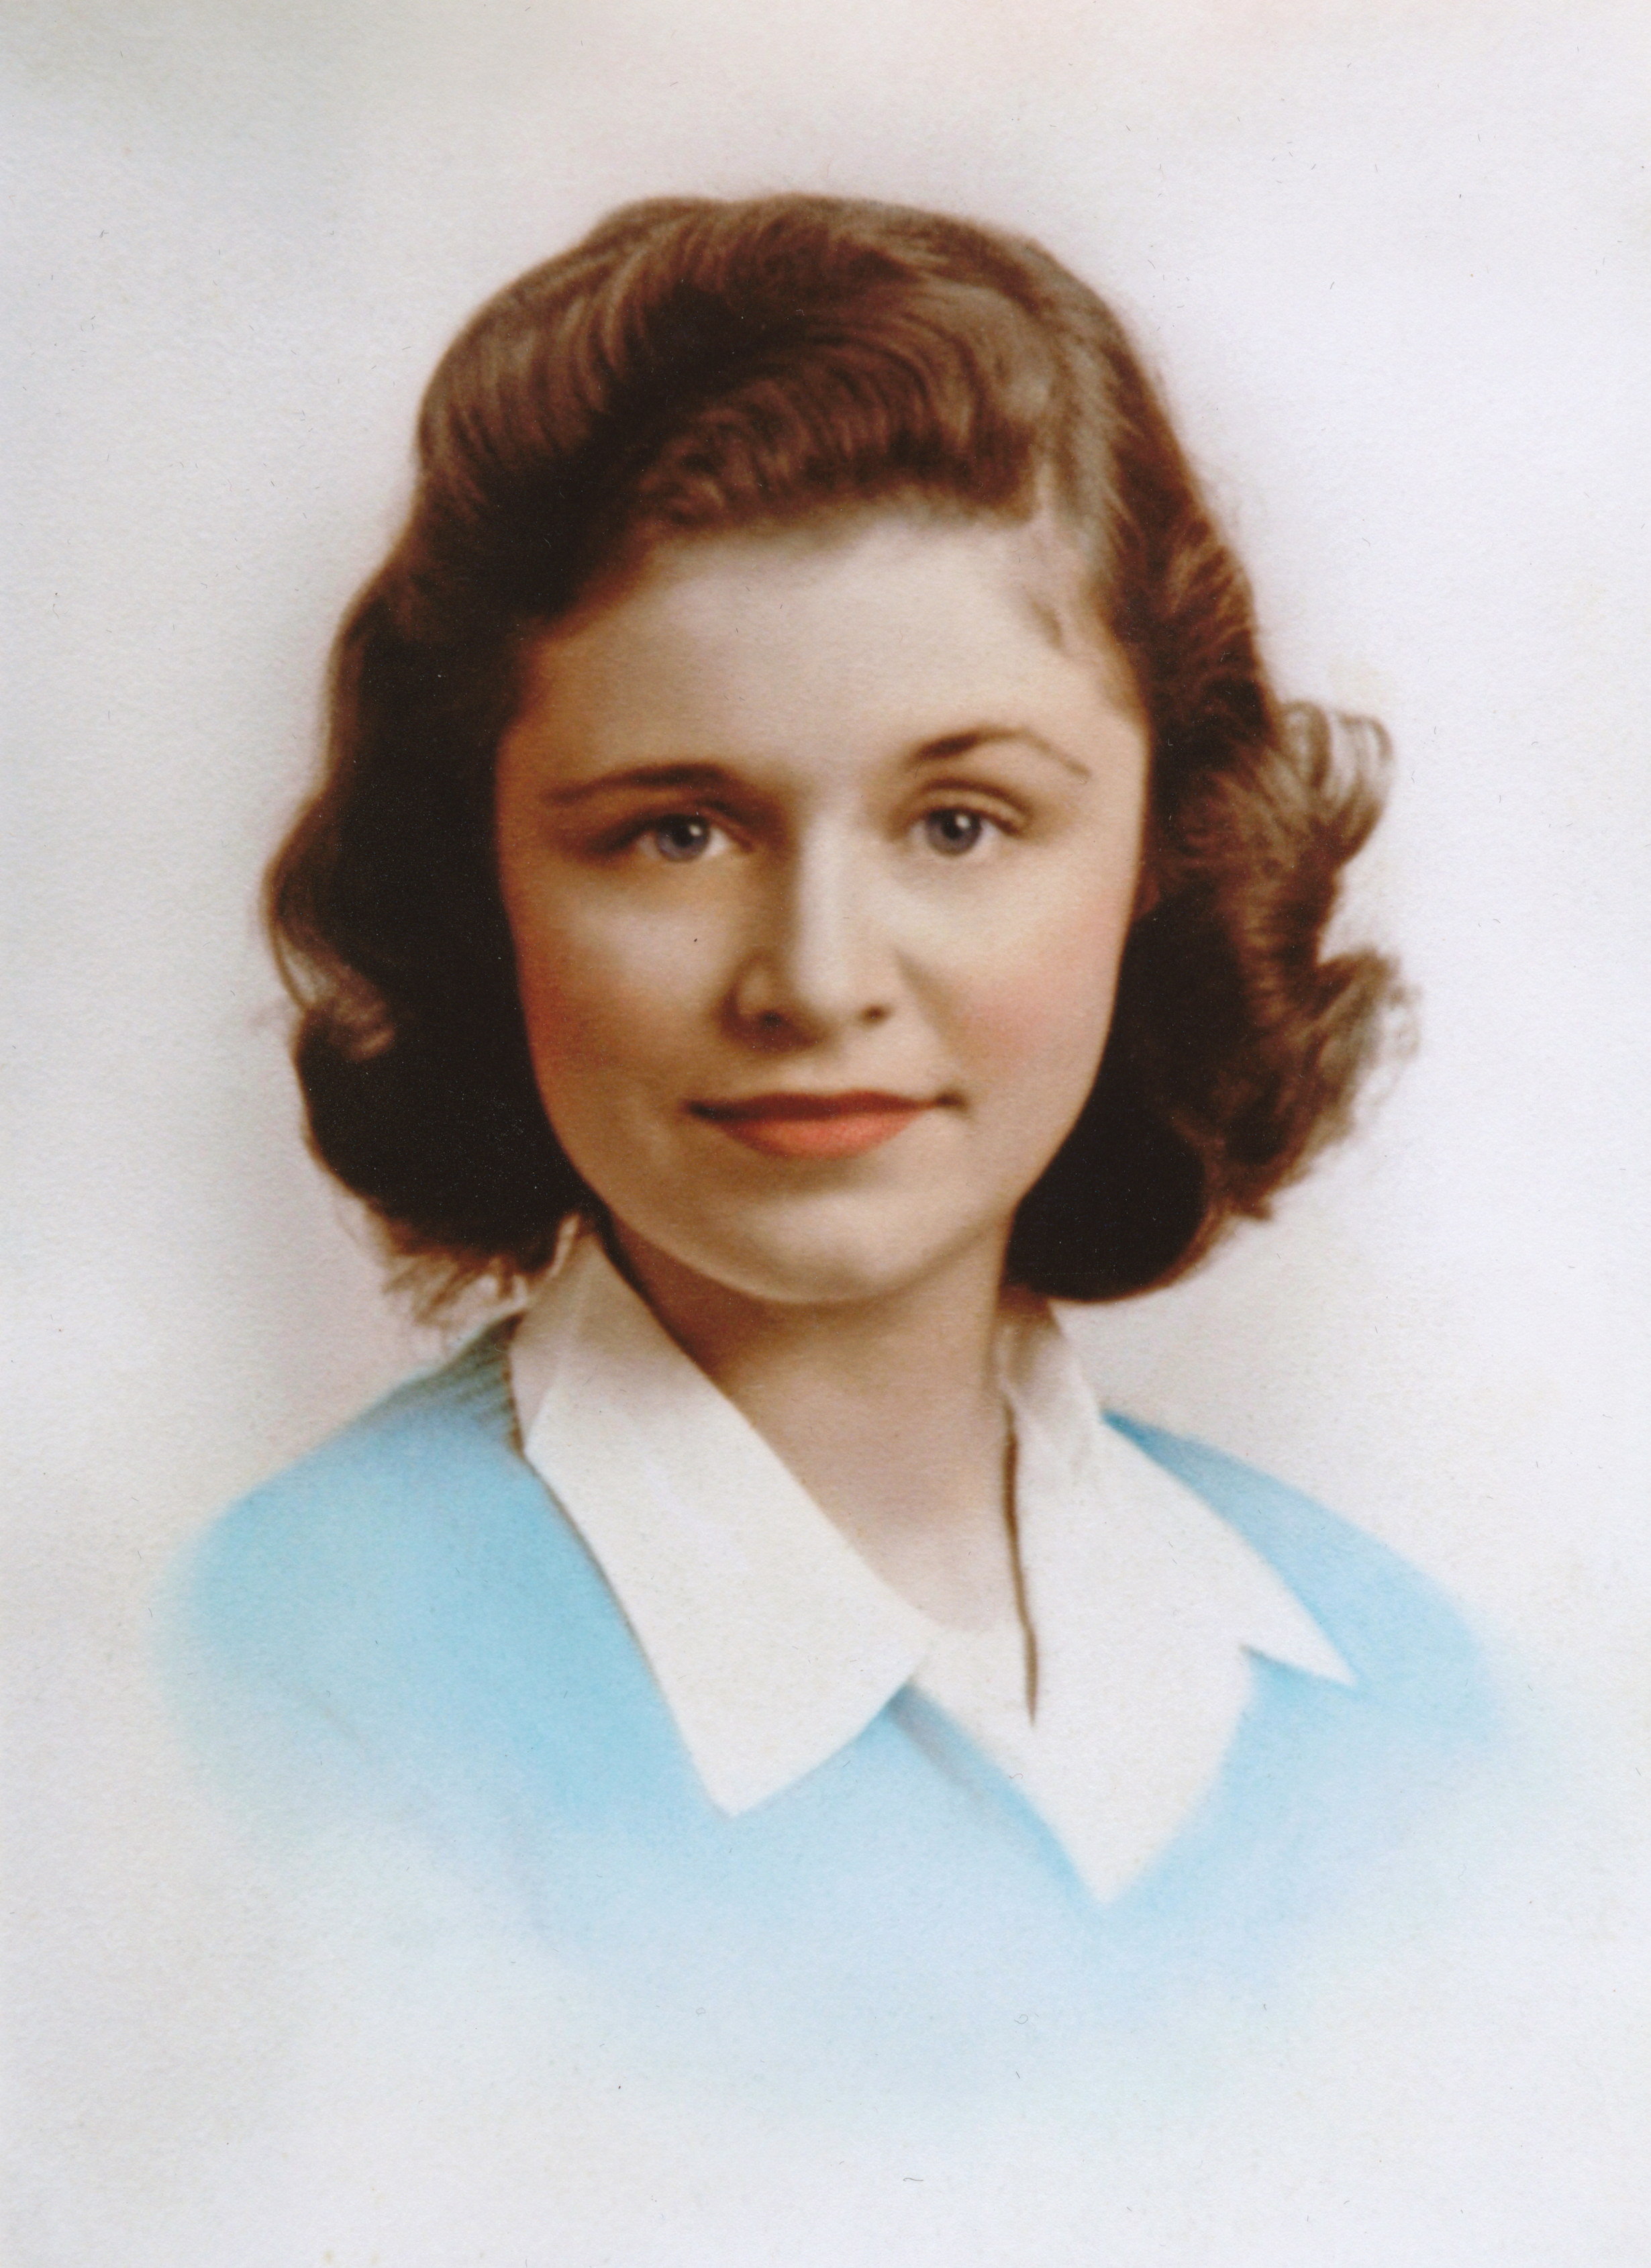 Margaret Russell (Shuping), Class of 1944, as a student at Carolina. (photo courtesy of Sallie Shuping-Russell)